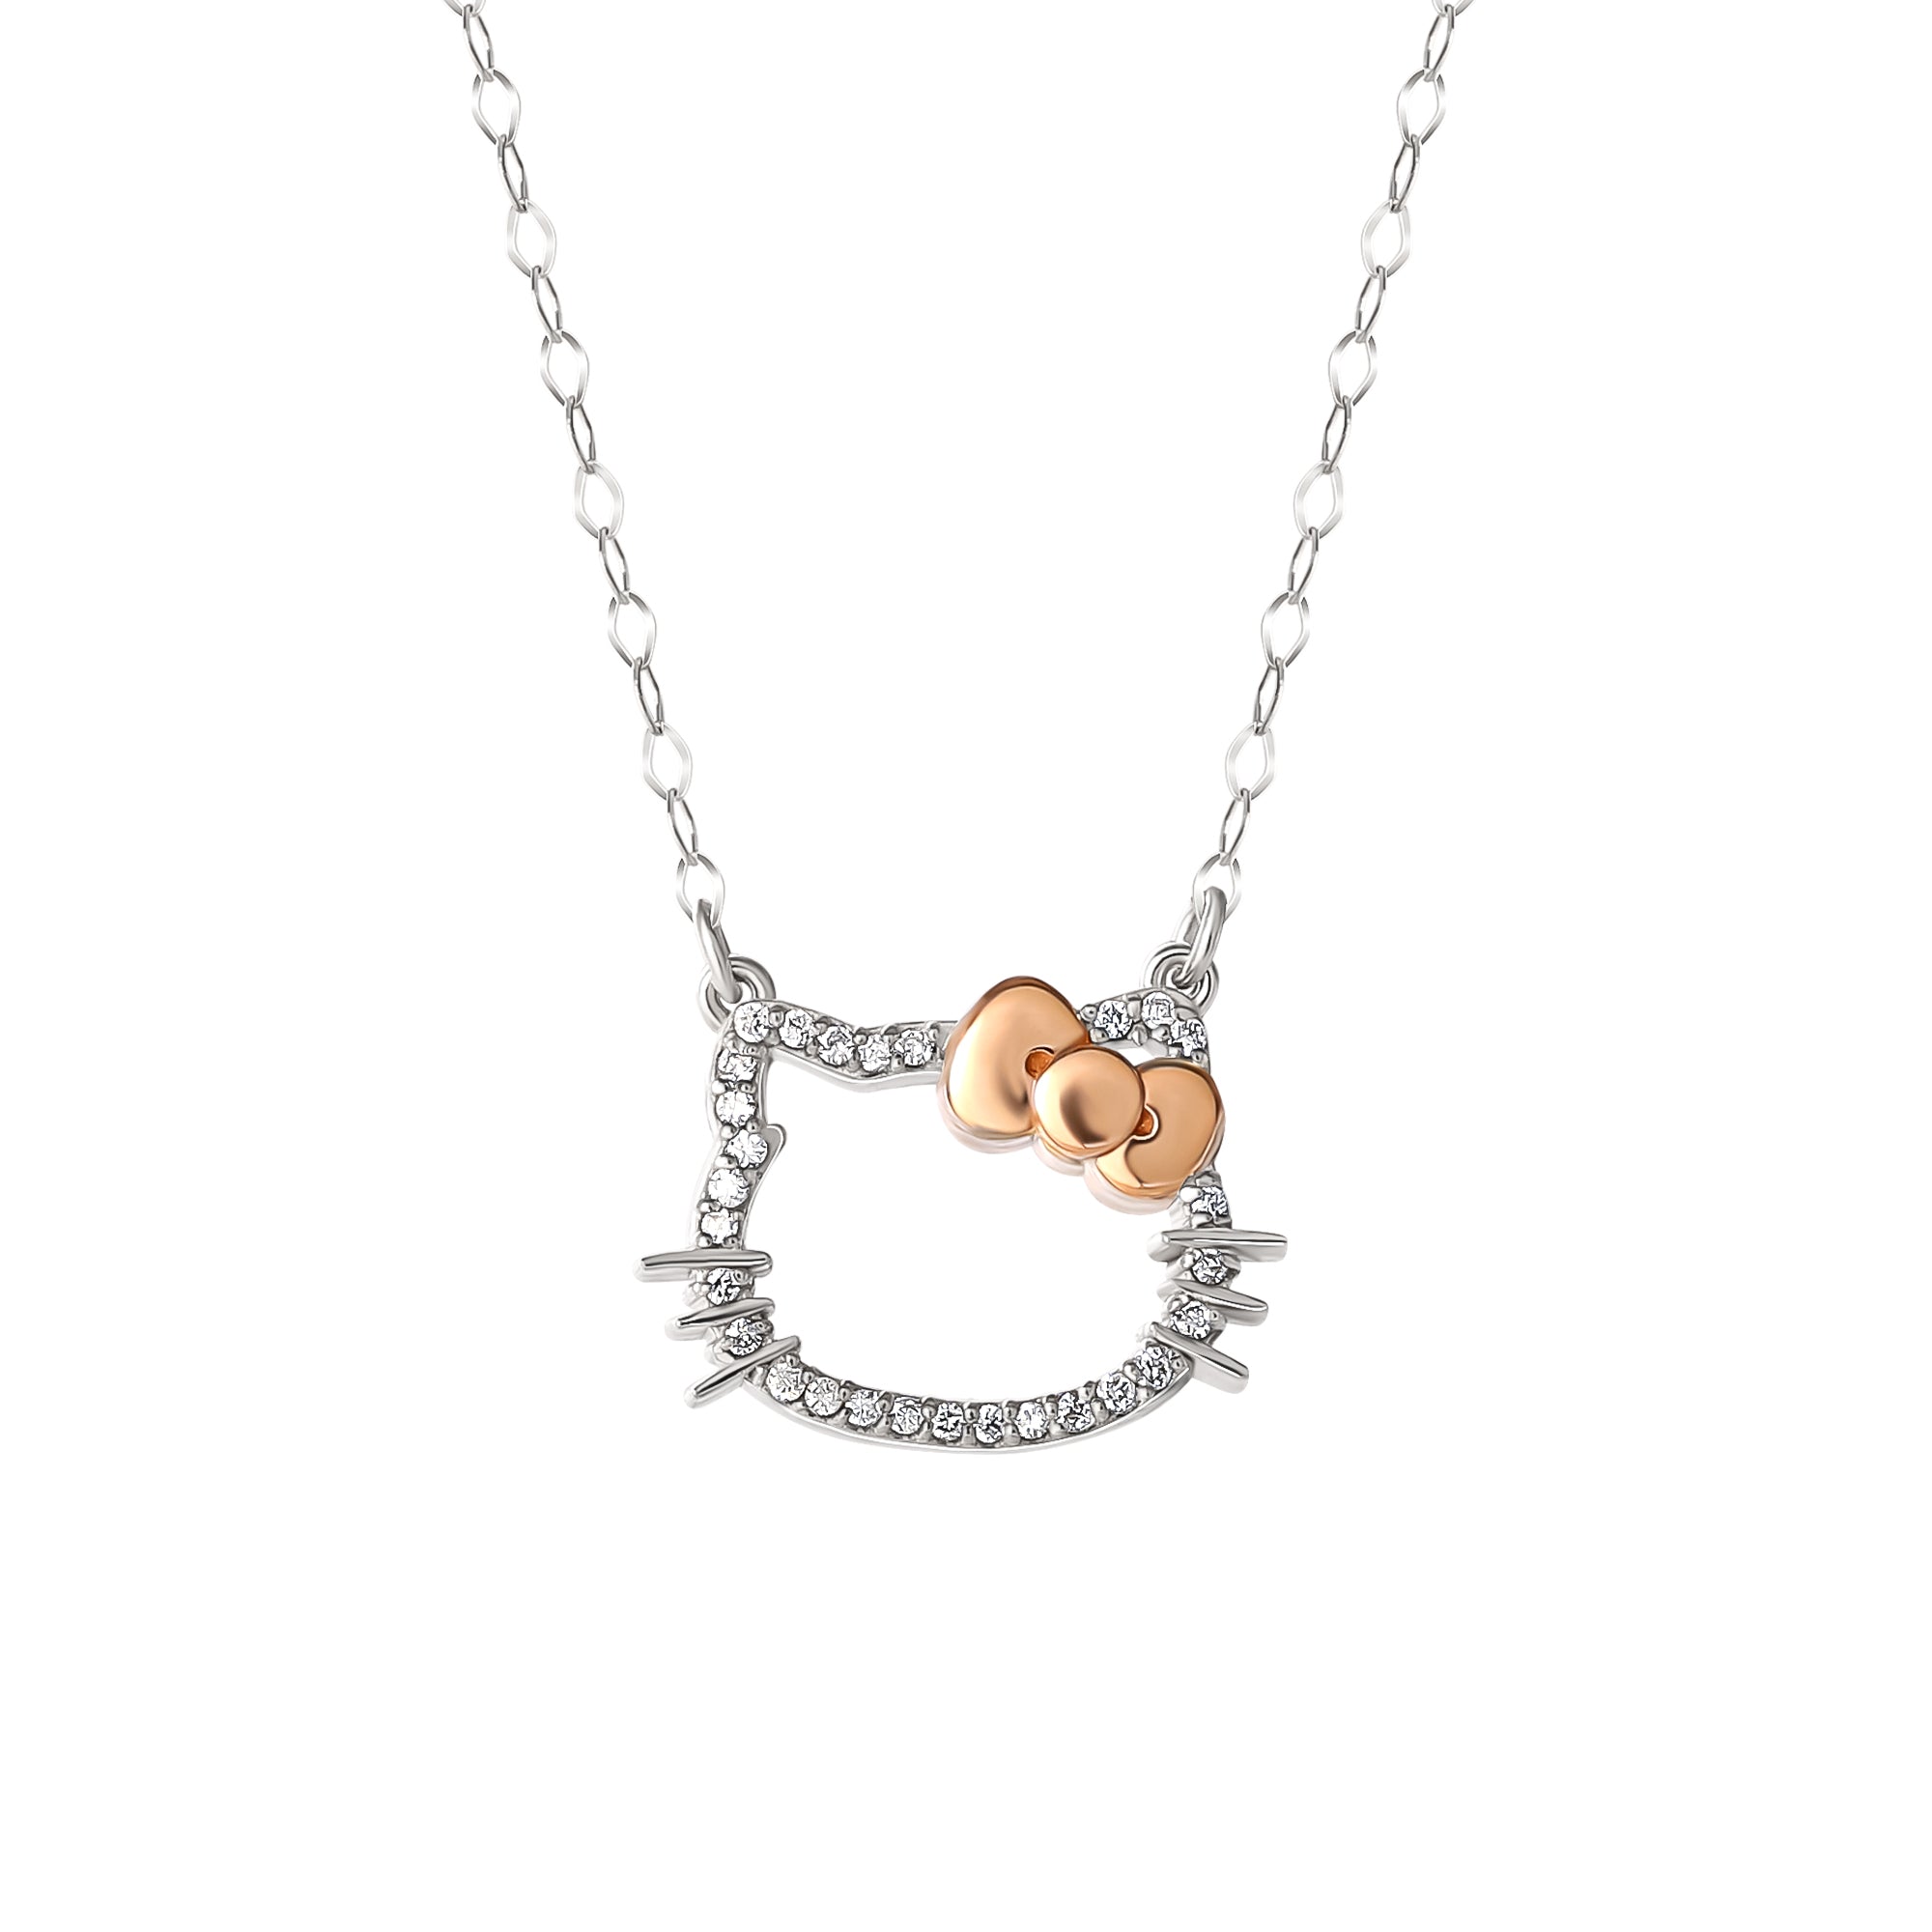 Hello Kitty Necklace - Heart Belly | Items By Mel, Inc.